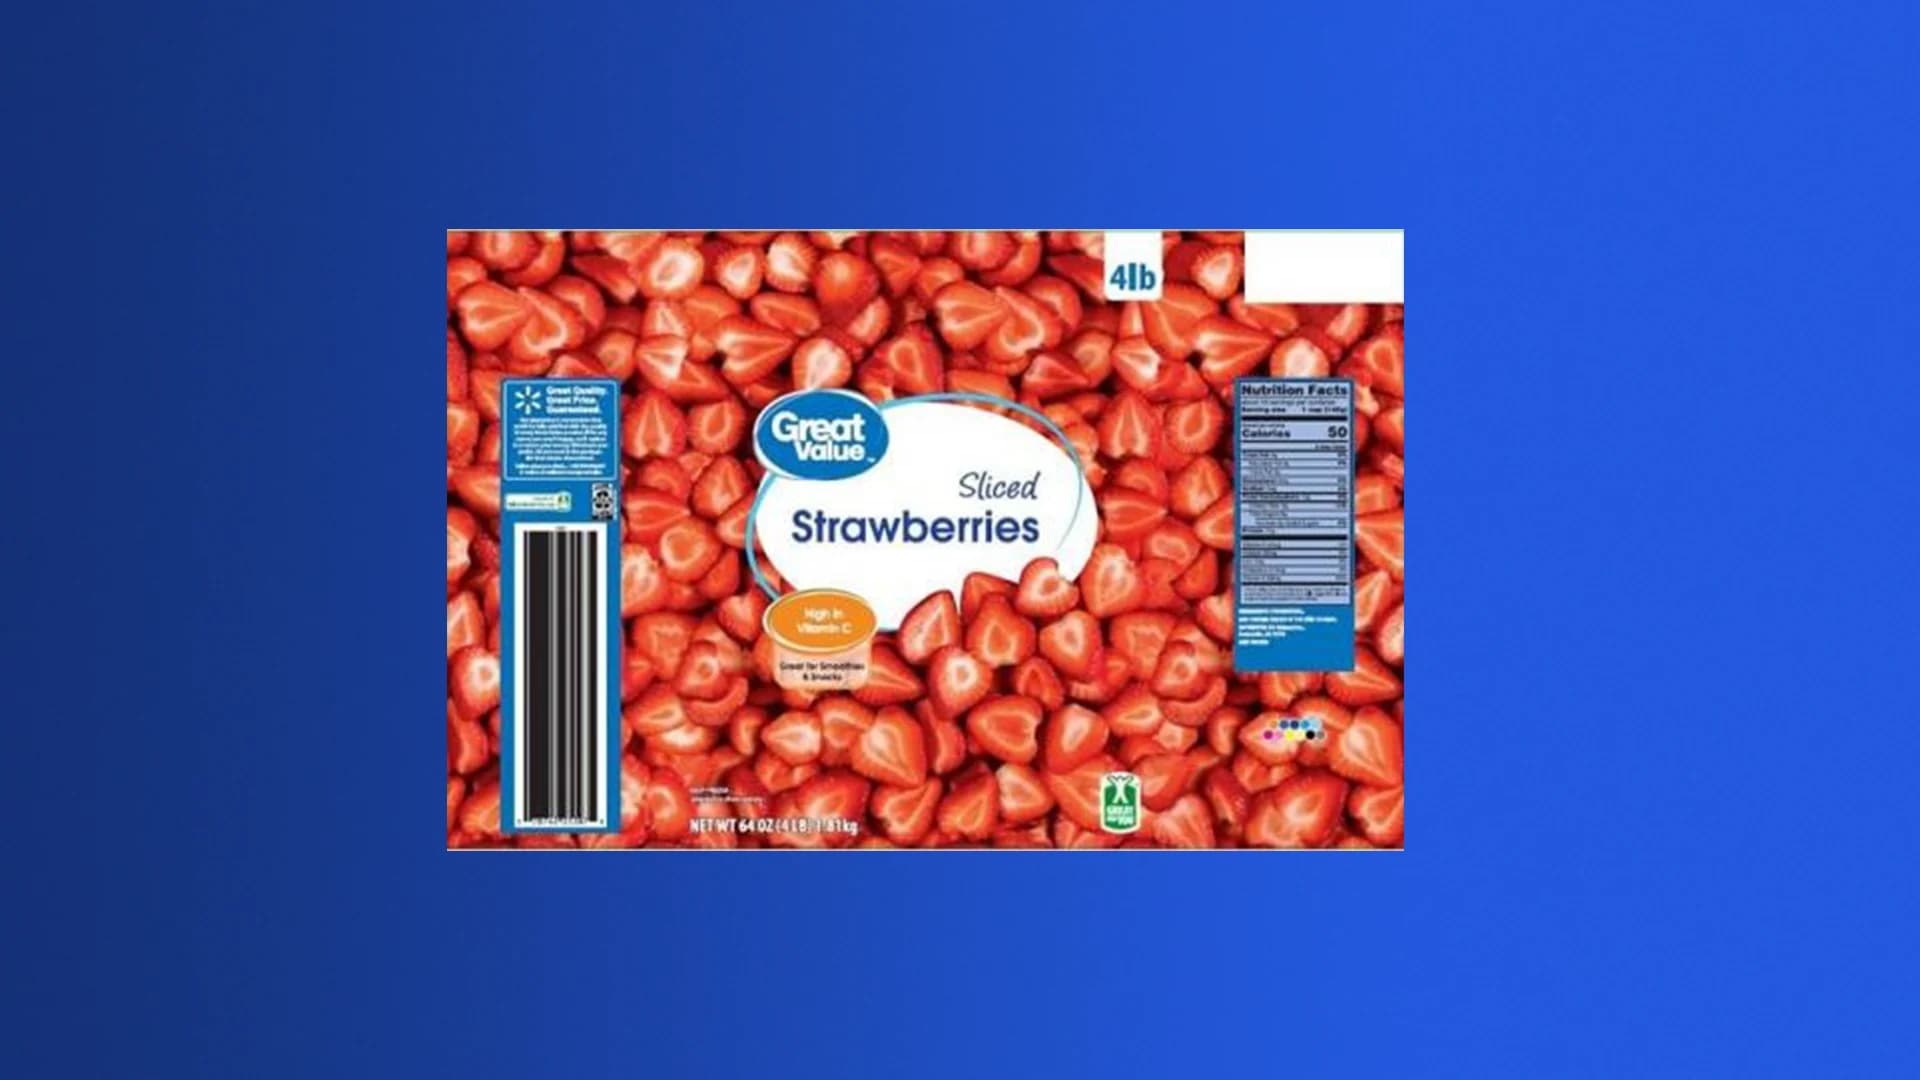 Recall Alert: Great Value frozen strawberries recalled for possible Hepatitis A contamination